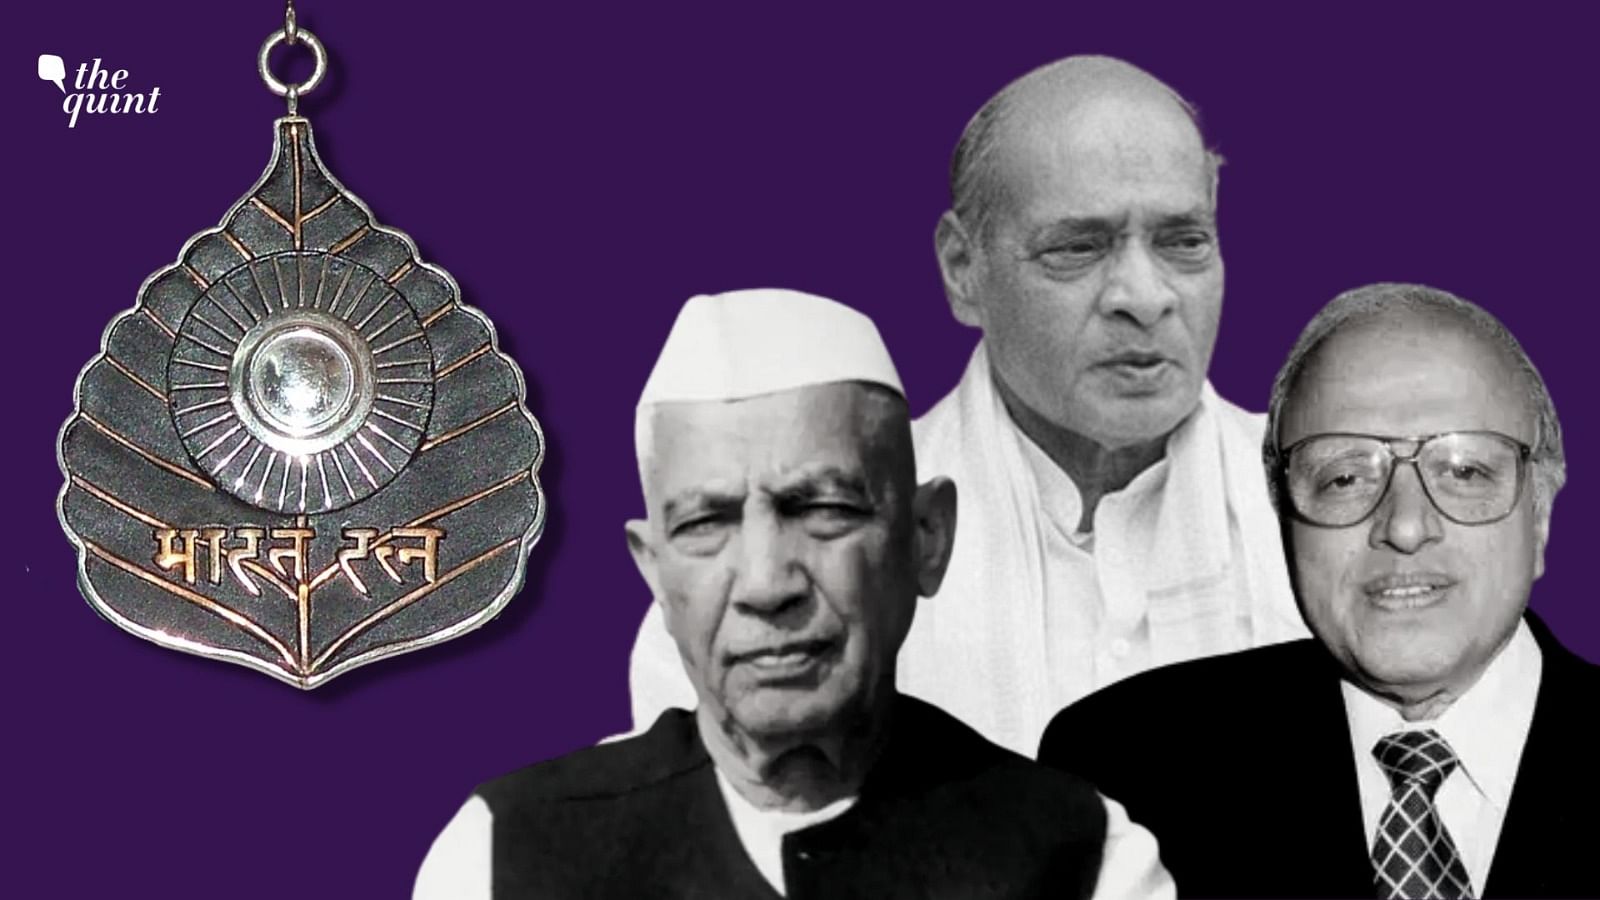 <div class="paragraphs"><p>The Union government on Friday, 8 February, announced that former Prime Ministers PV Narasimha Rao Garu, Chaudhary Charan Singh and agricultural scientist MS Swaminathan will be conferred with Bharat Ratna, India’s highest civilian award, posthumously.</p></div>